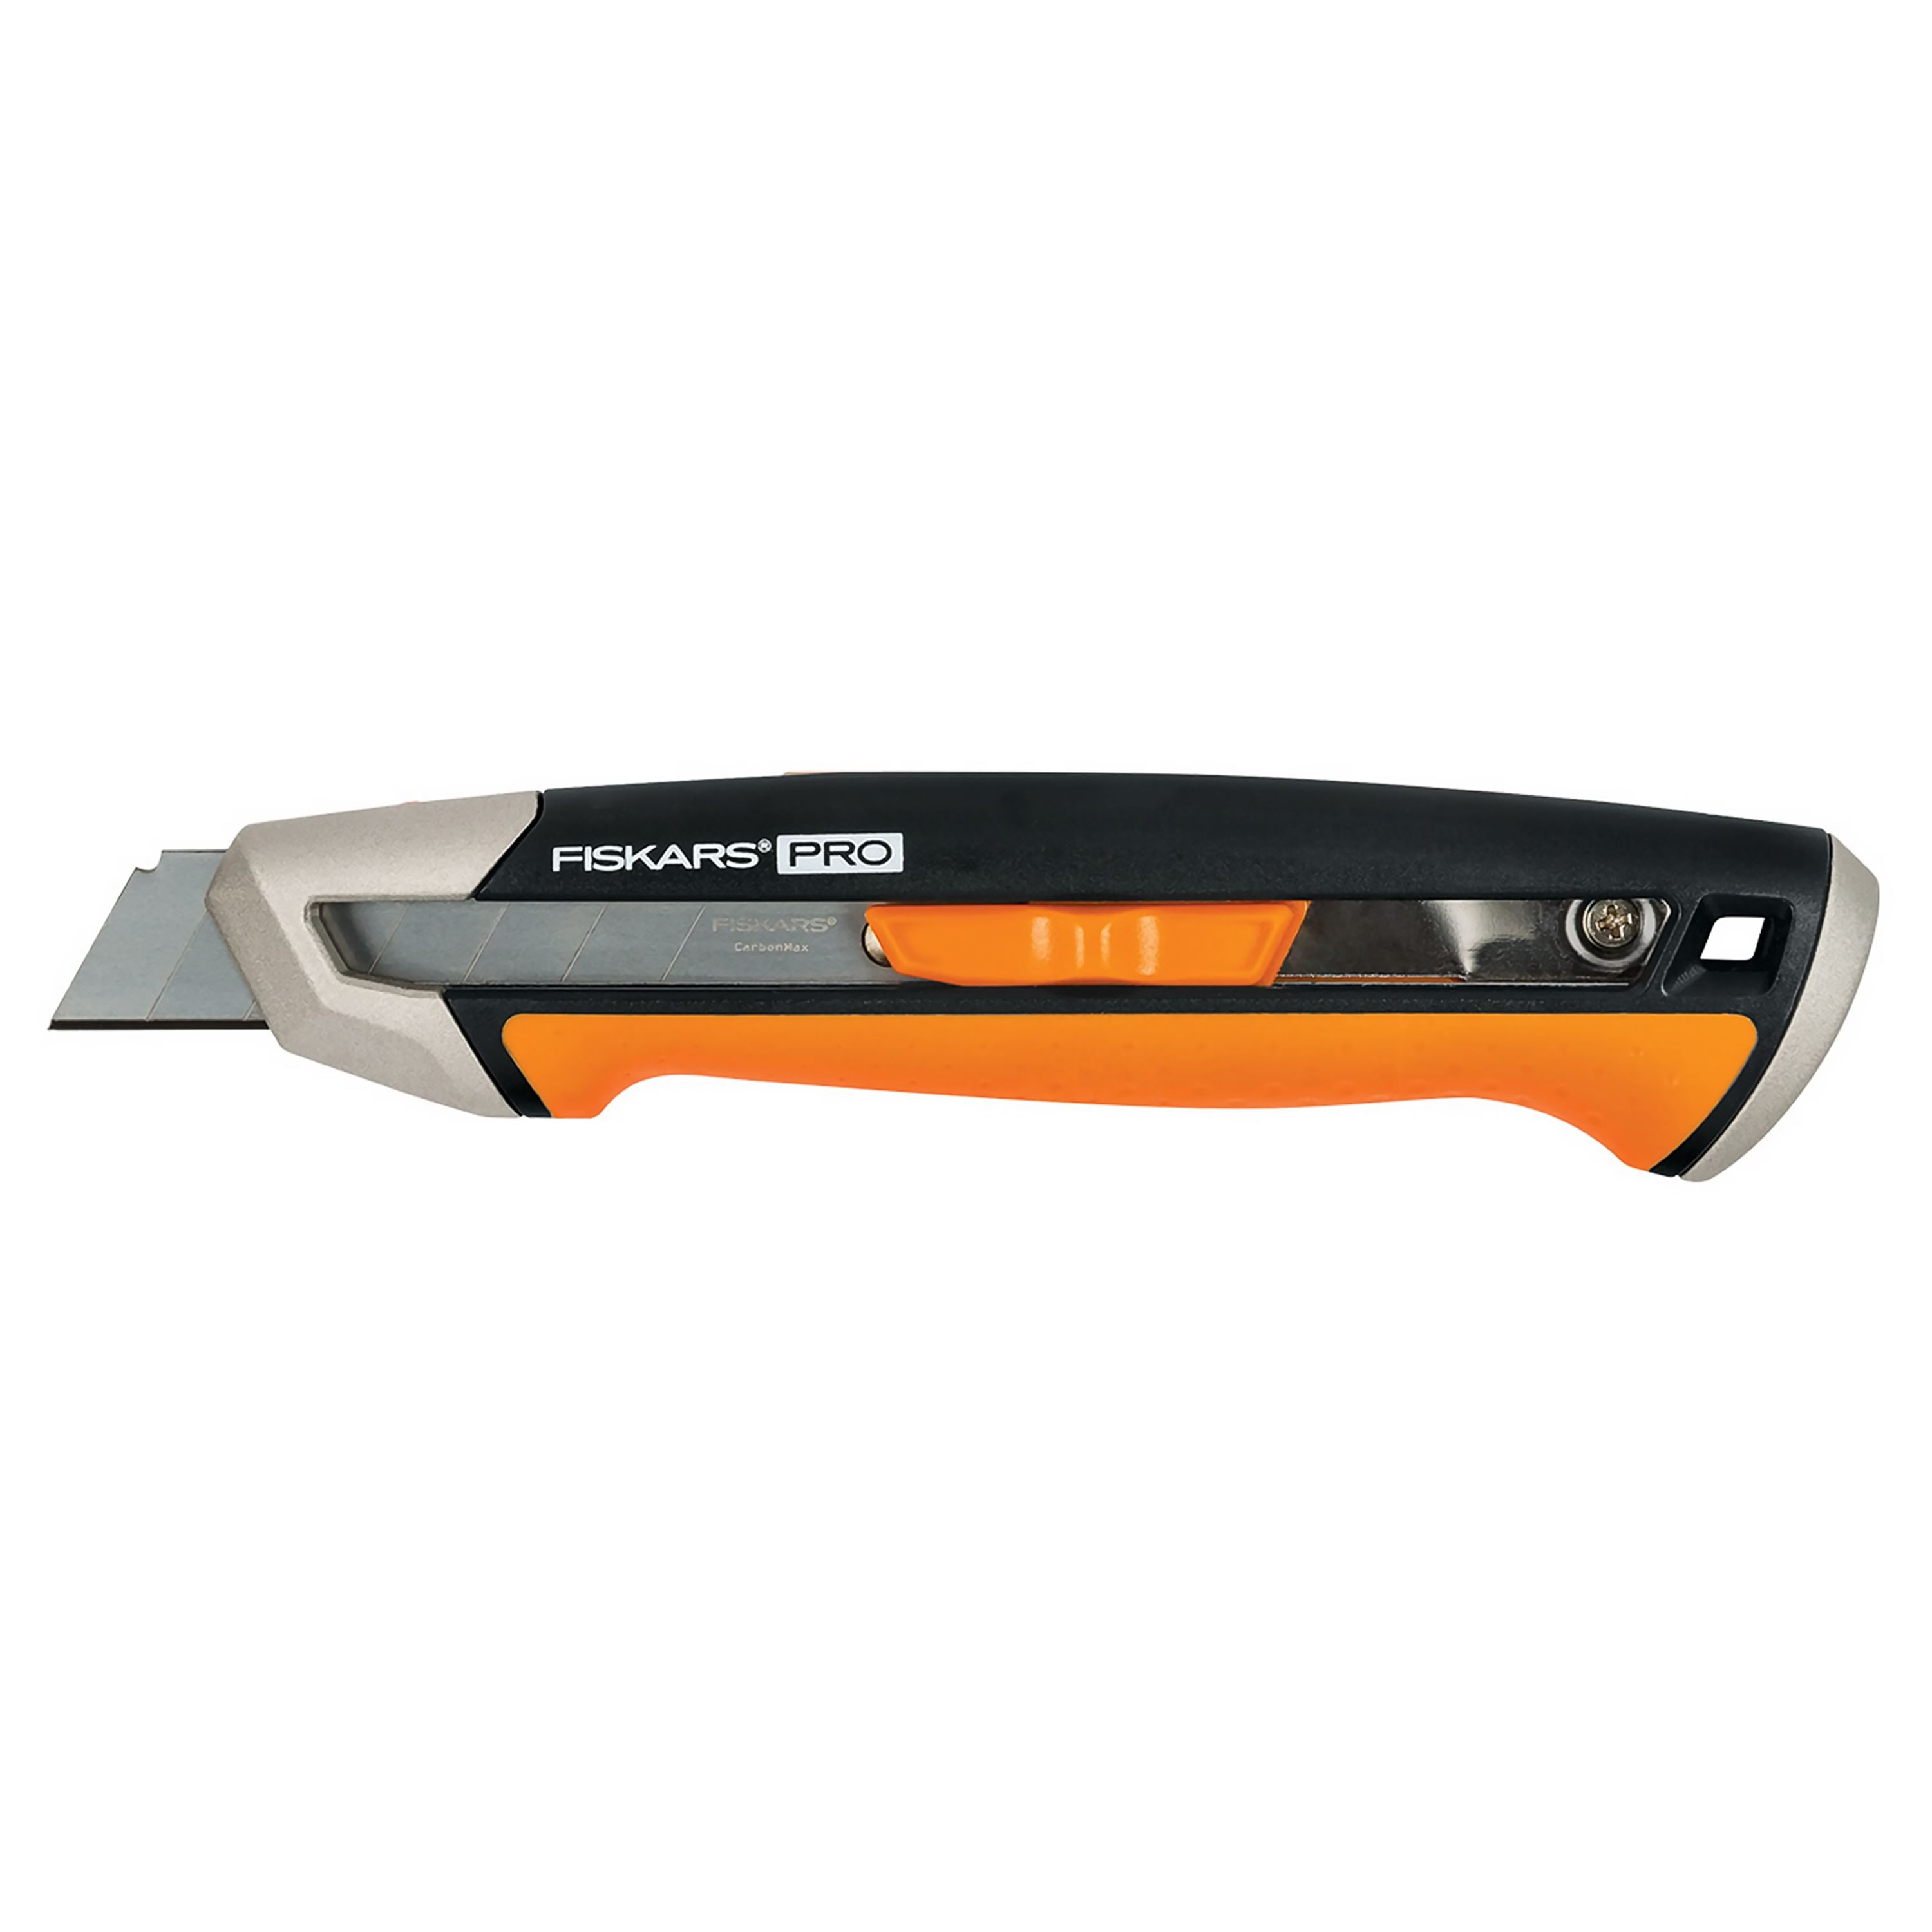 Cat Safety Squeeze Utility Knife - 240071